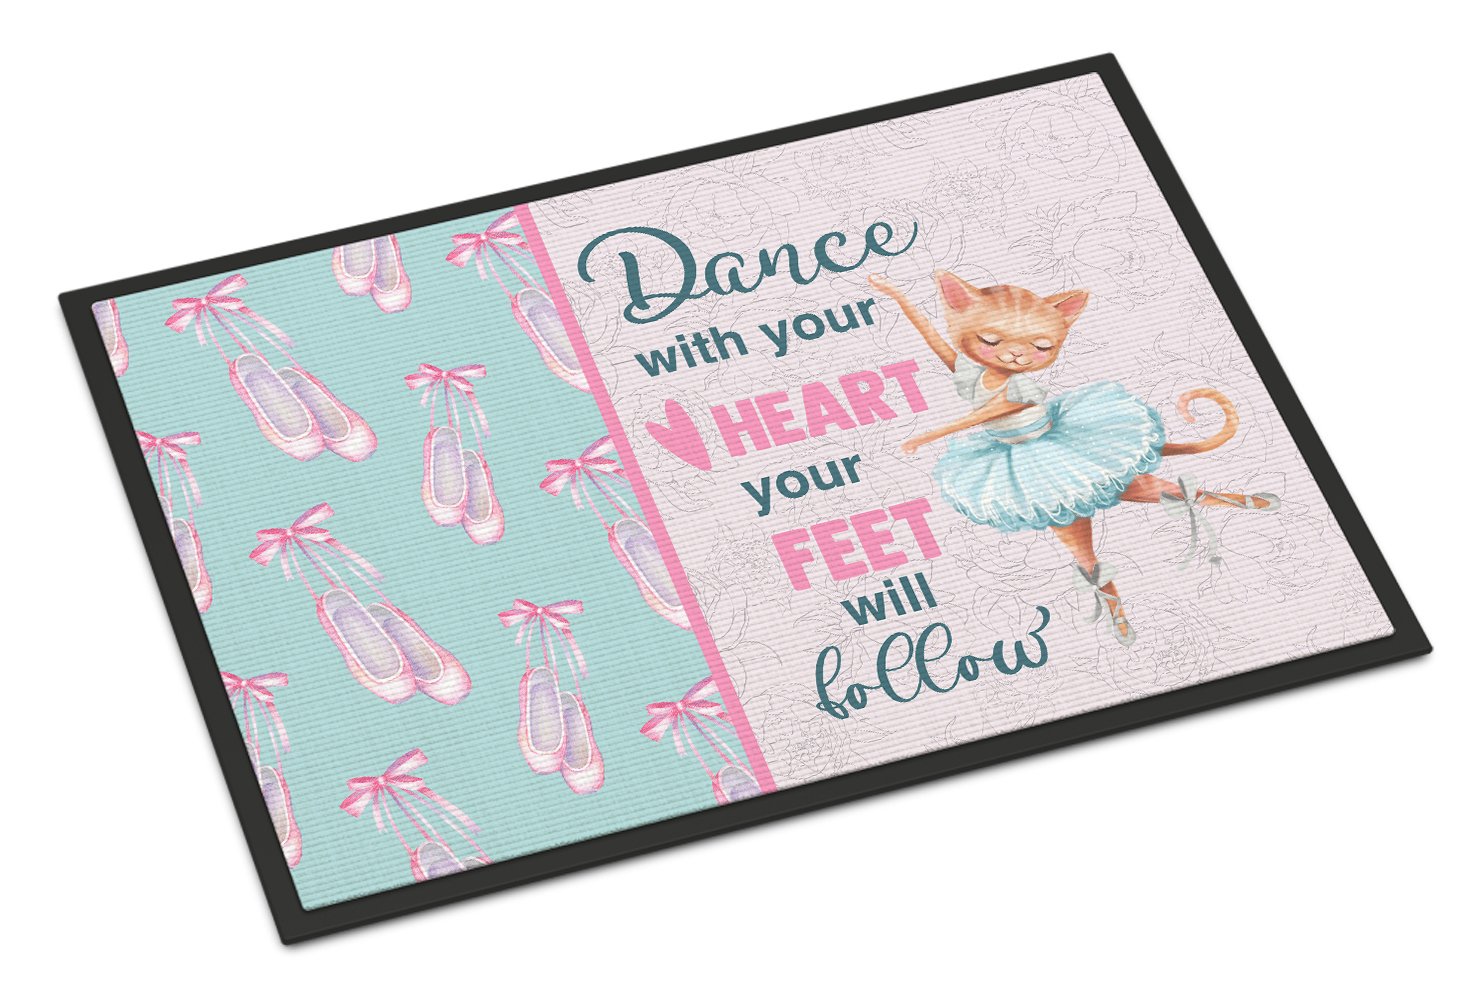 Buy this Dance with your heart and your feet will follow Indoor or Outdoor Mat 24x36